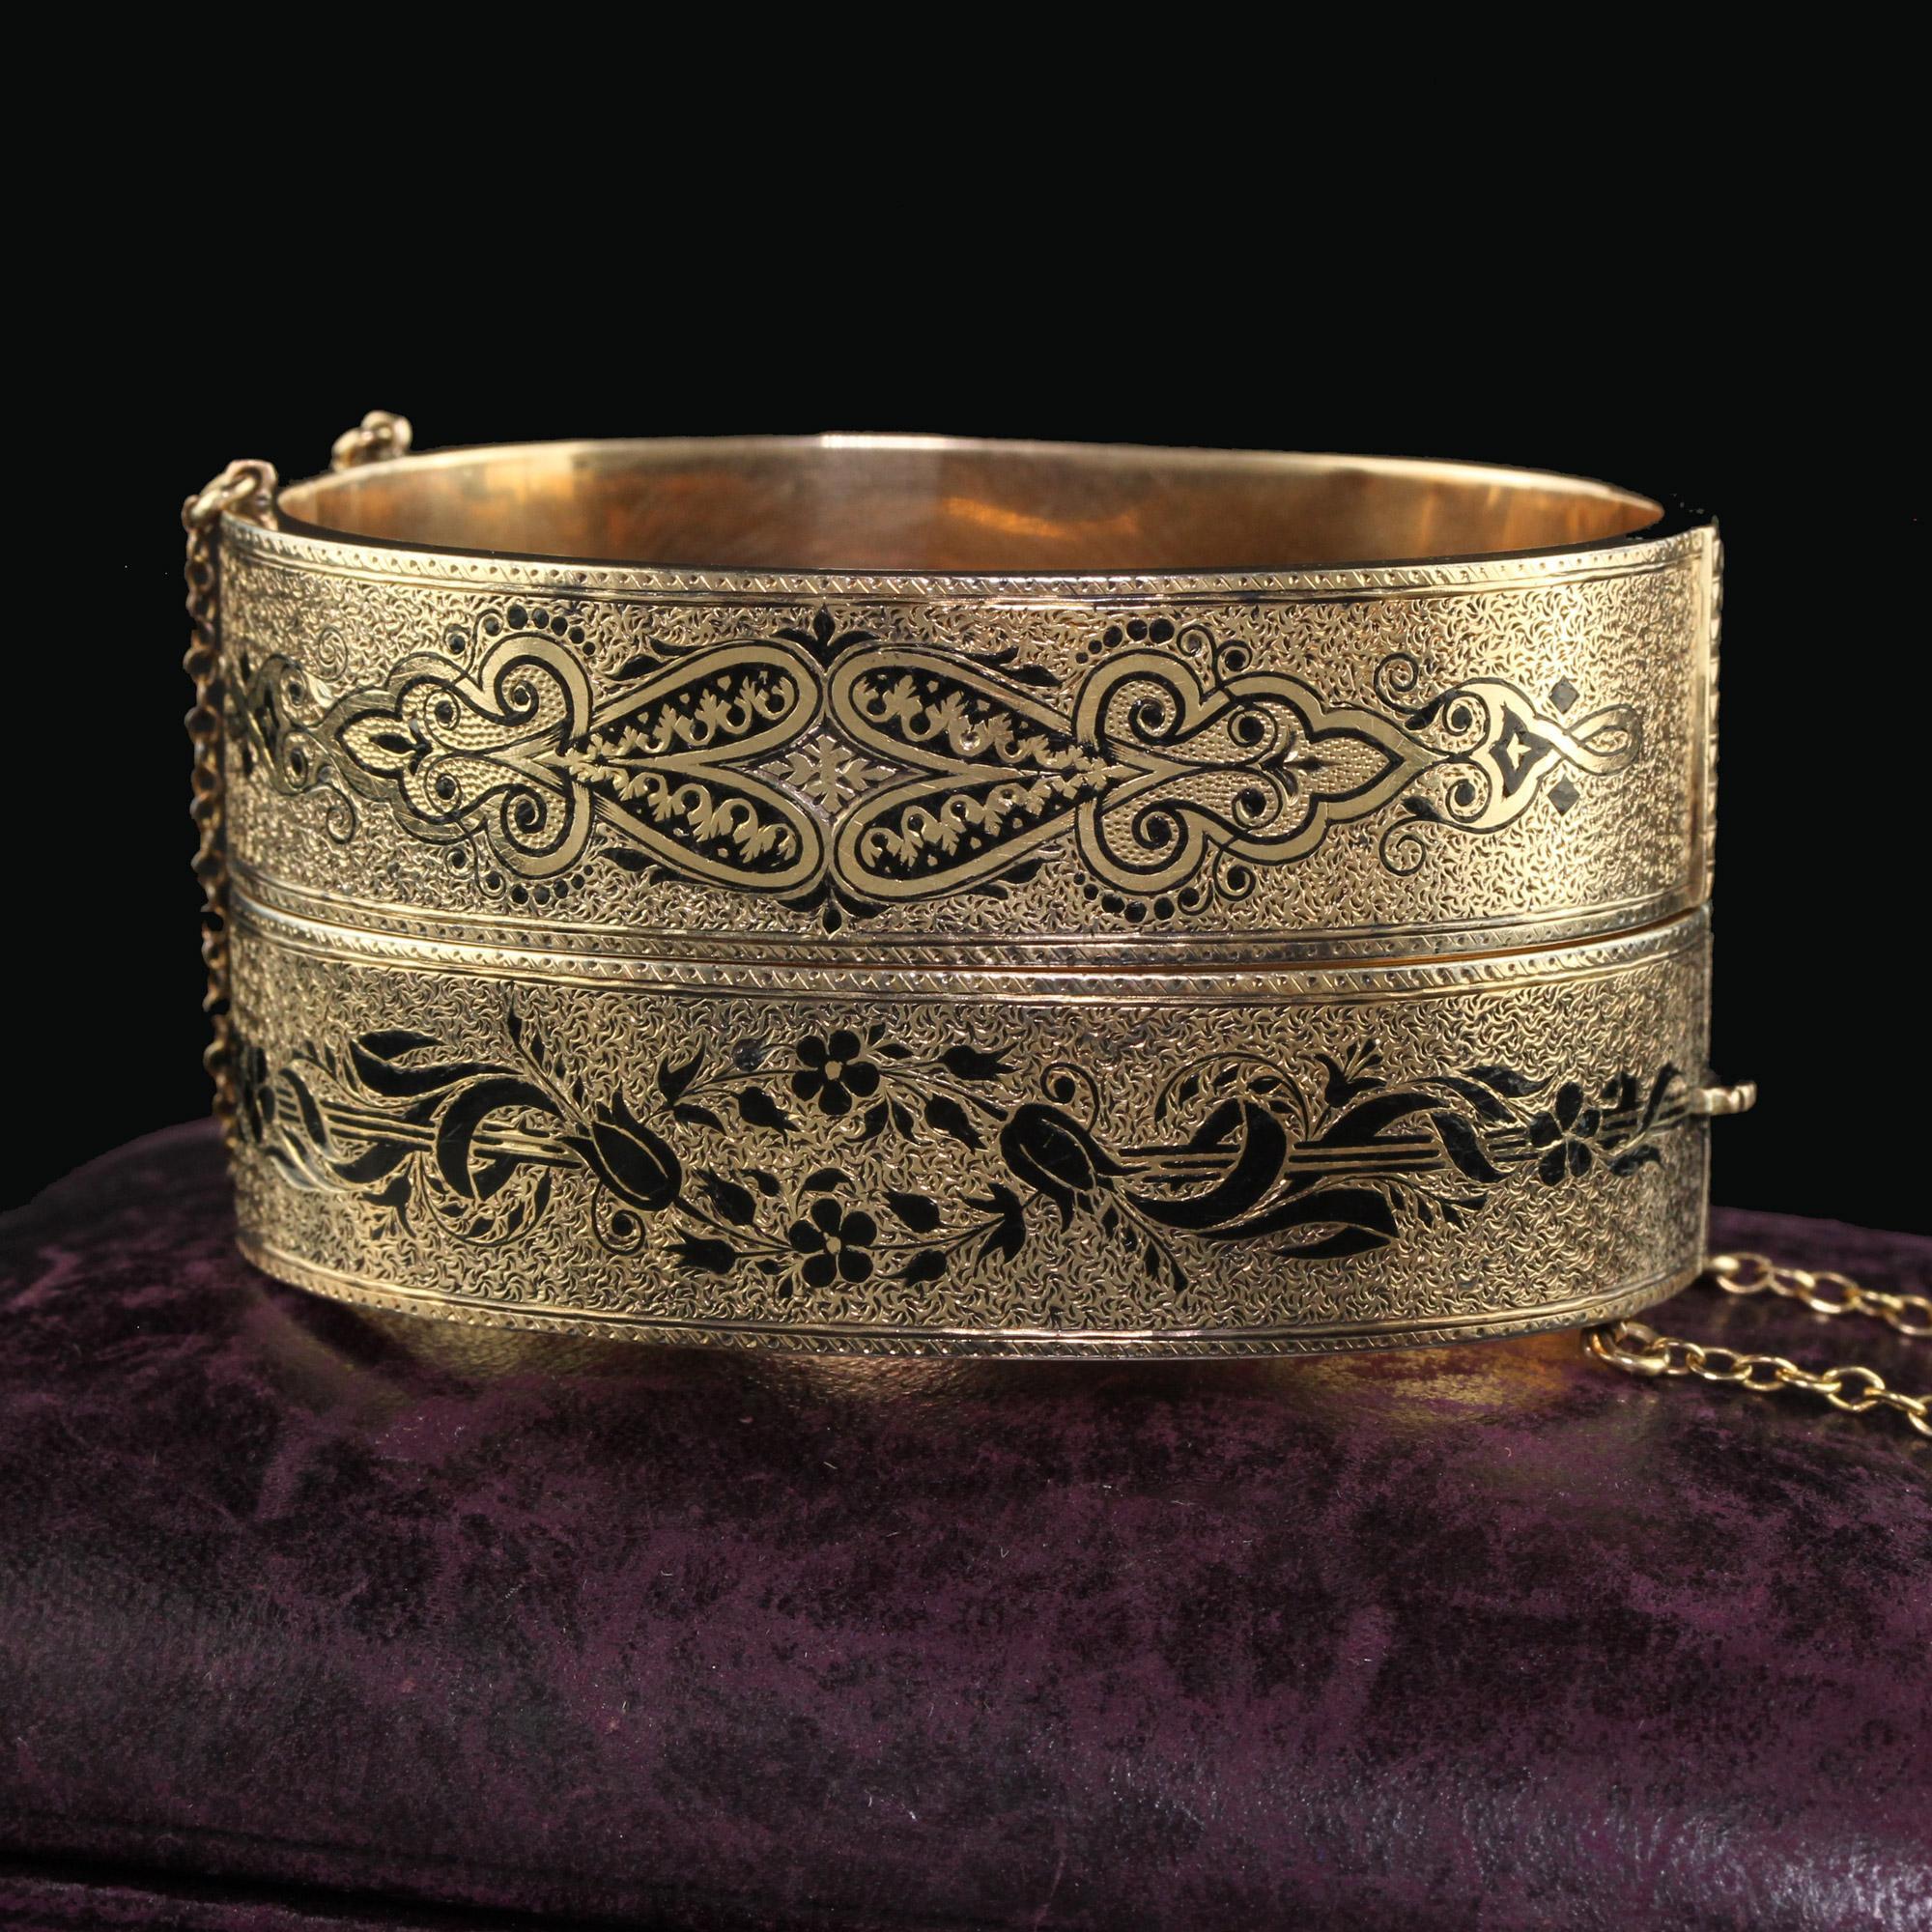 Beautiful Antique Victorian 12K Yellow Gold Wide Engraved Enamel Wedding Bangle Bracelet Set. This beautiful set of Victorian bangles are crafted in 12k yellow gold. The bangle bracelets have gorgeous engravings on the top going around the entire